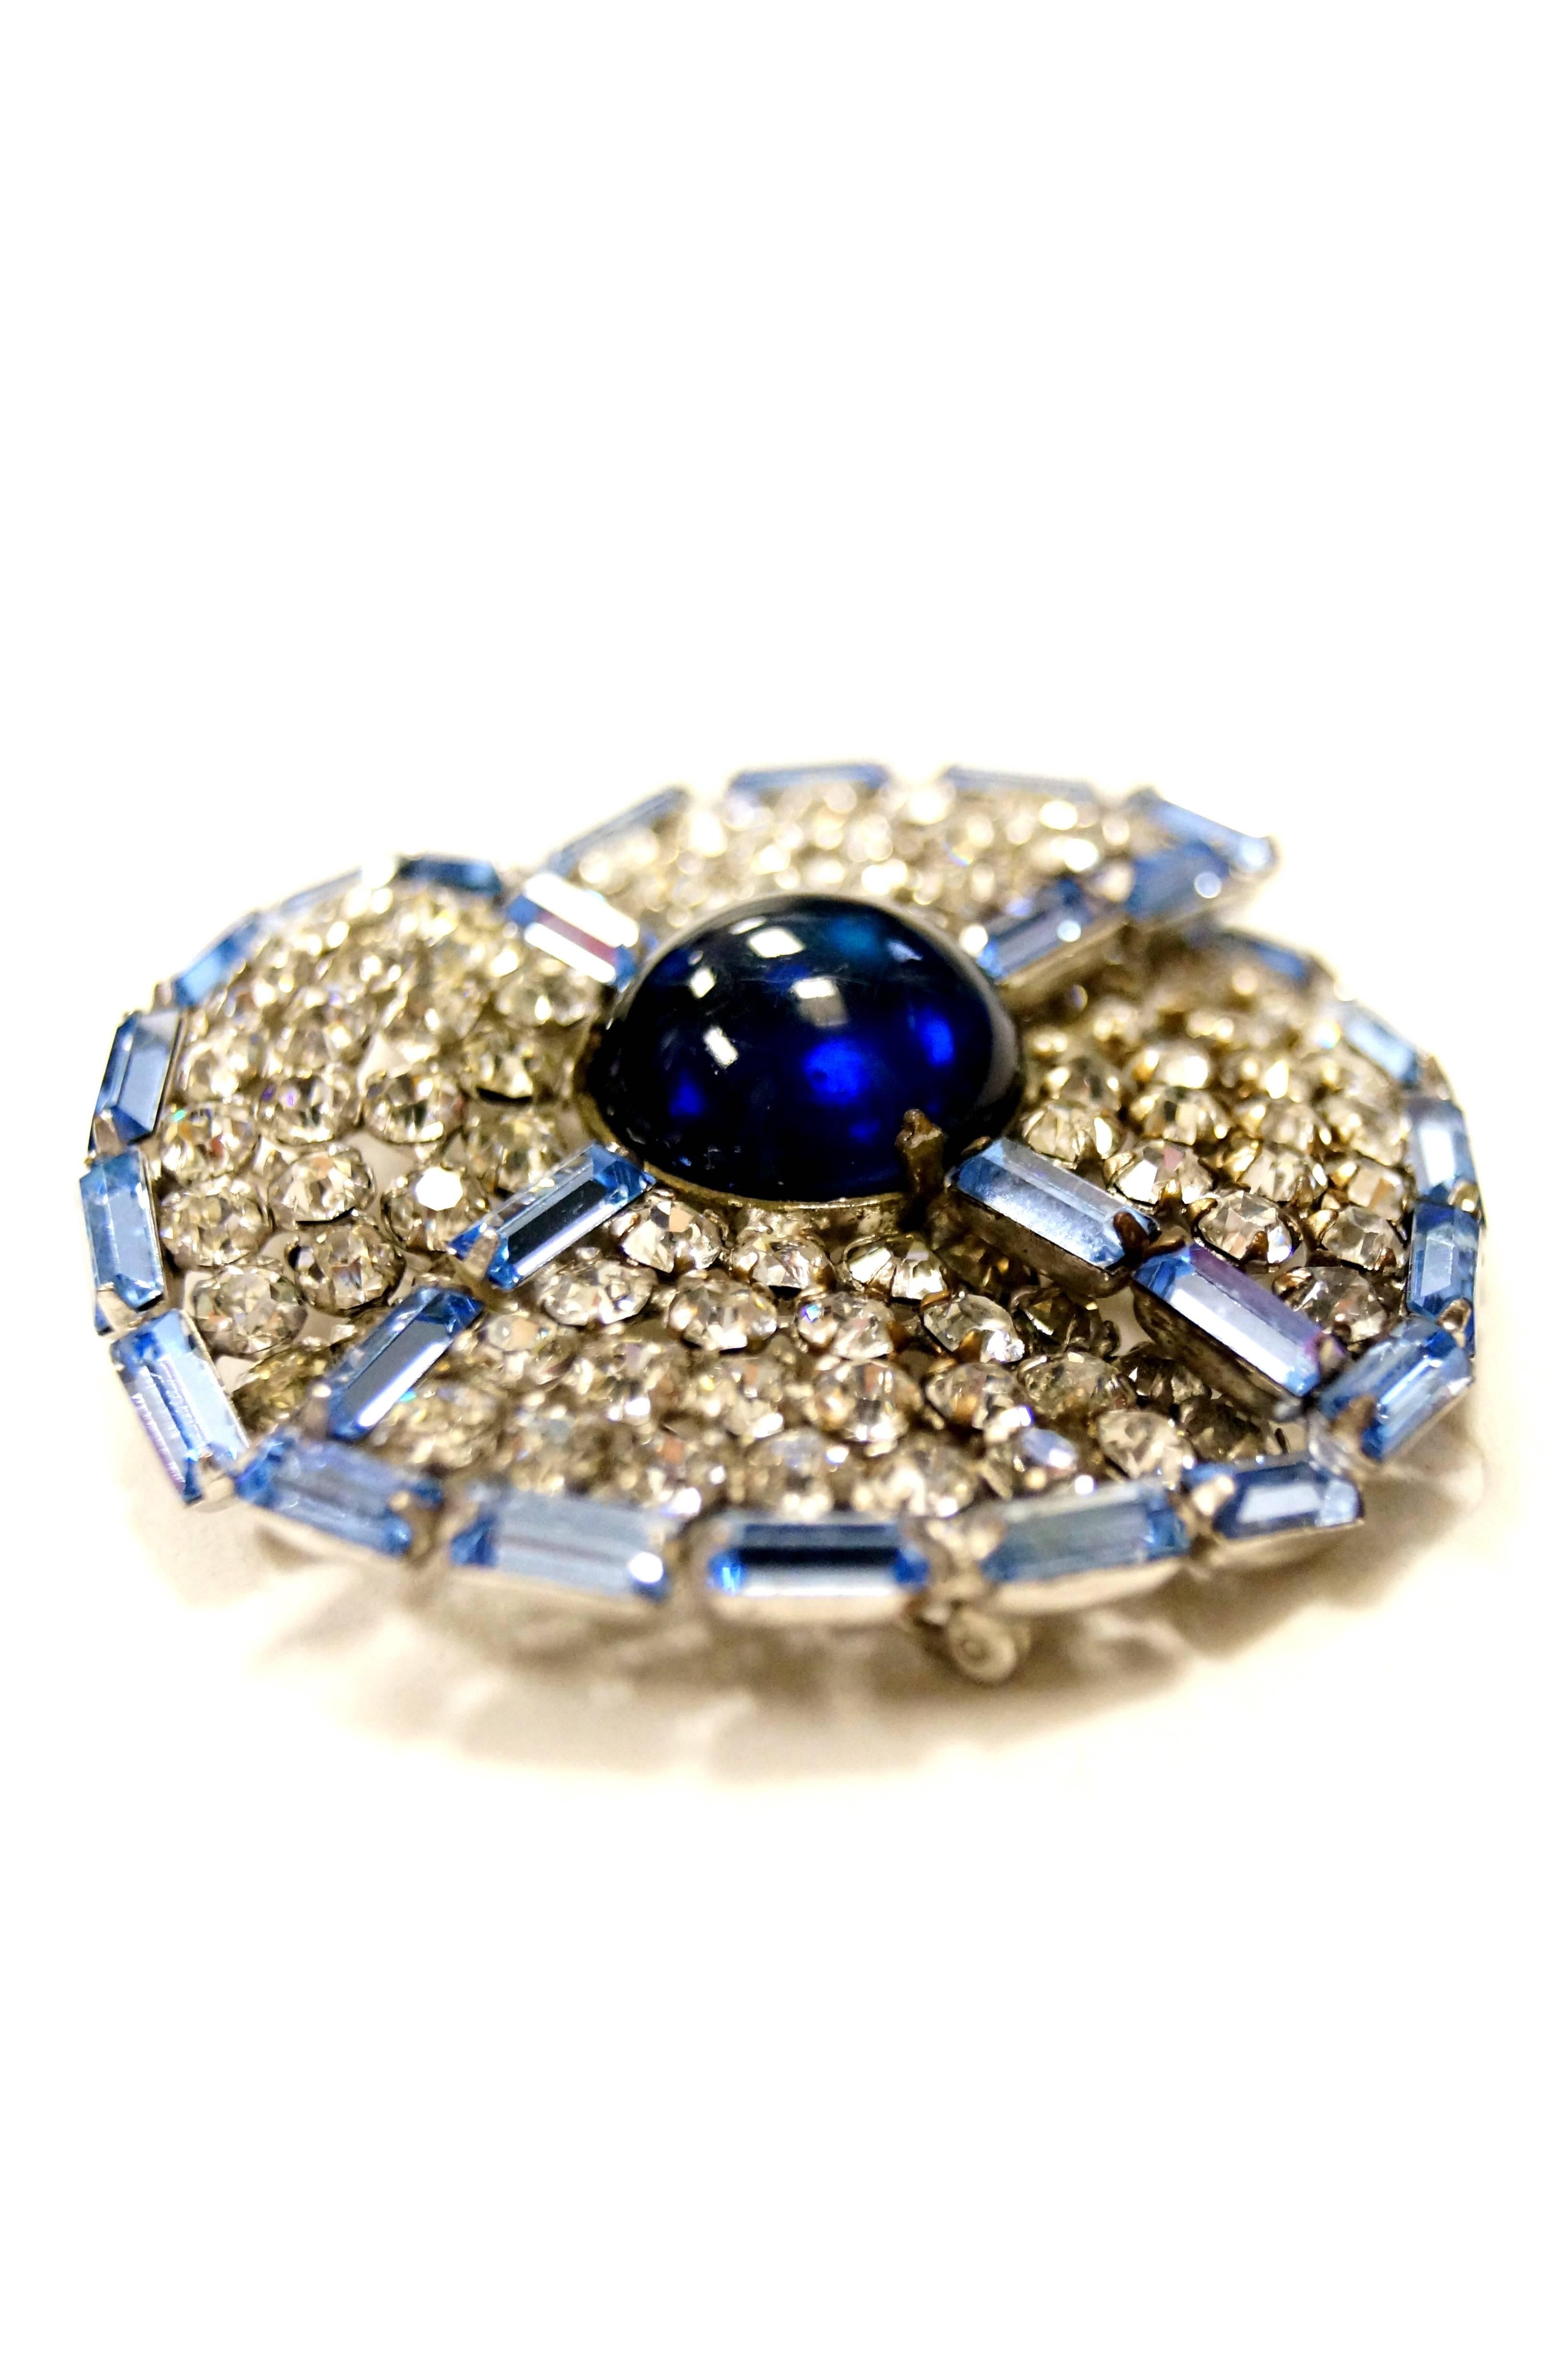 Beautiful 2 inch round rhinestone brooch in a pinwheel shape!  This Hattie Carnegie brooch is composed of several overlapping rhinestone wedges. The wedges are bordered in blue baguette rhinestones that hold in the small round multifaceted clear